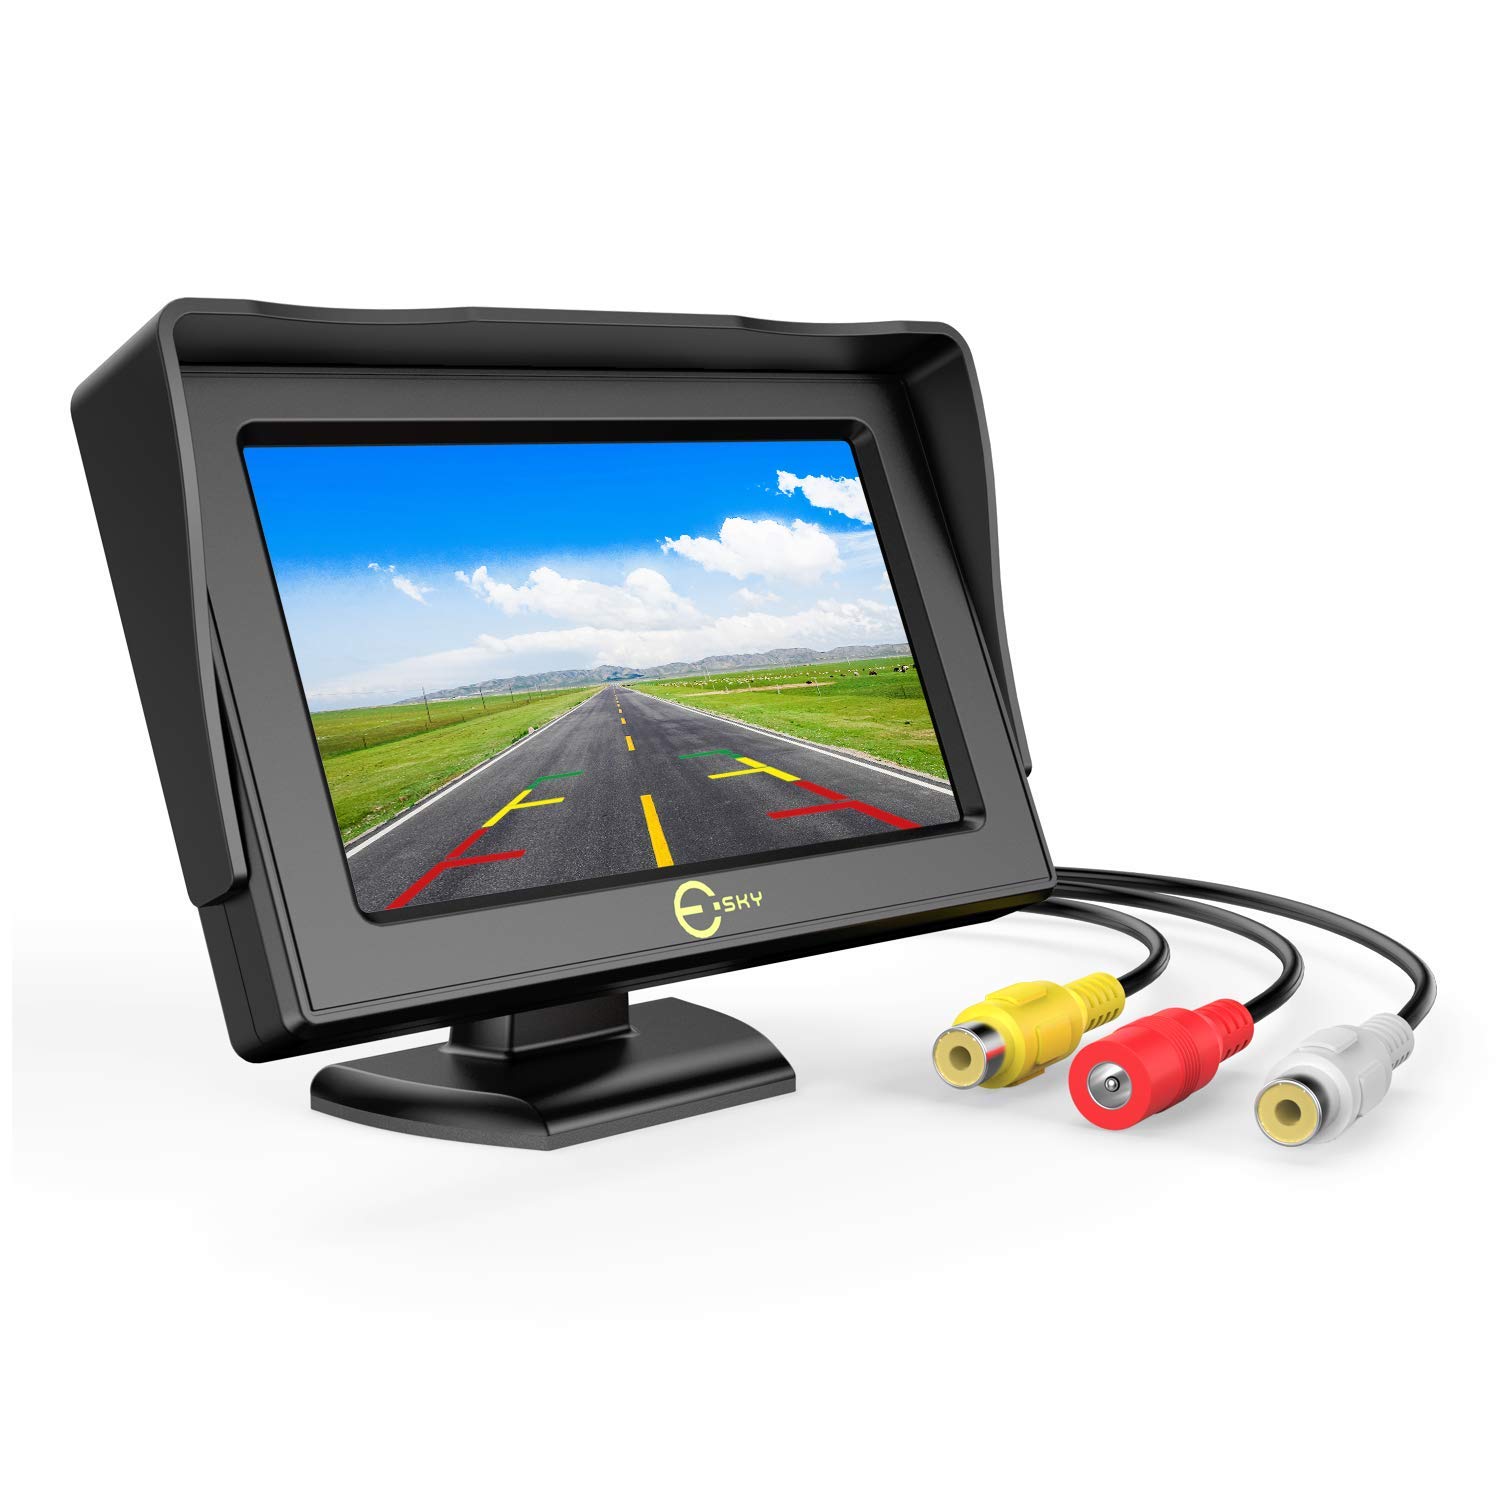 Sluimeren over Inzichtelijk Car Rear View Backup Monitor,Esky 4.3 Inch TFT LCD Color Display Car Rear  View 180 Degree Adjustable Monitor Screen for Rearview Vehicle Backup  Parking Cameras[The Wirecutter's Pick]